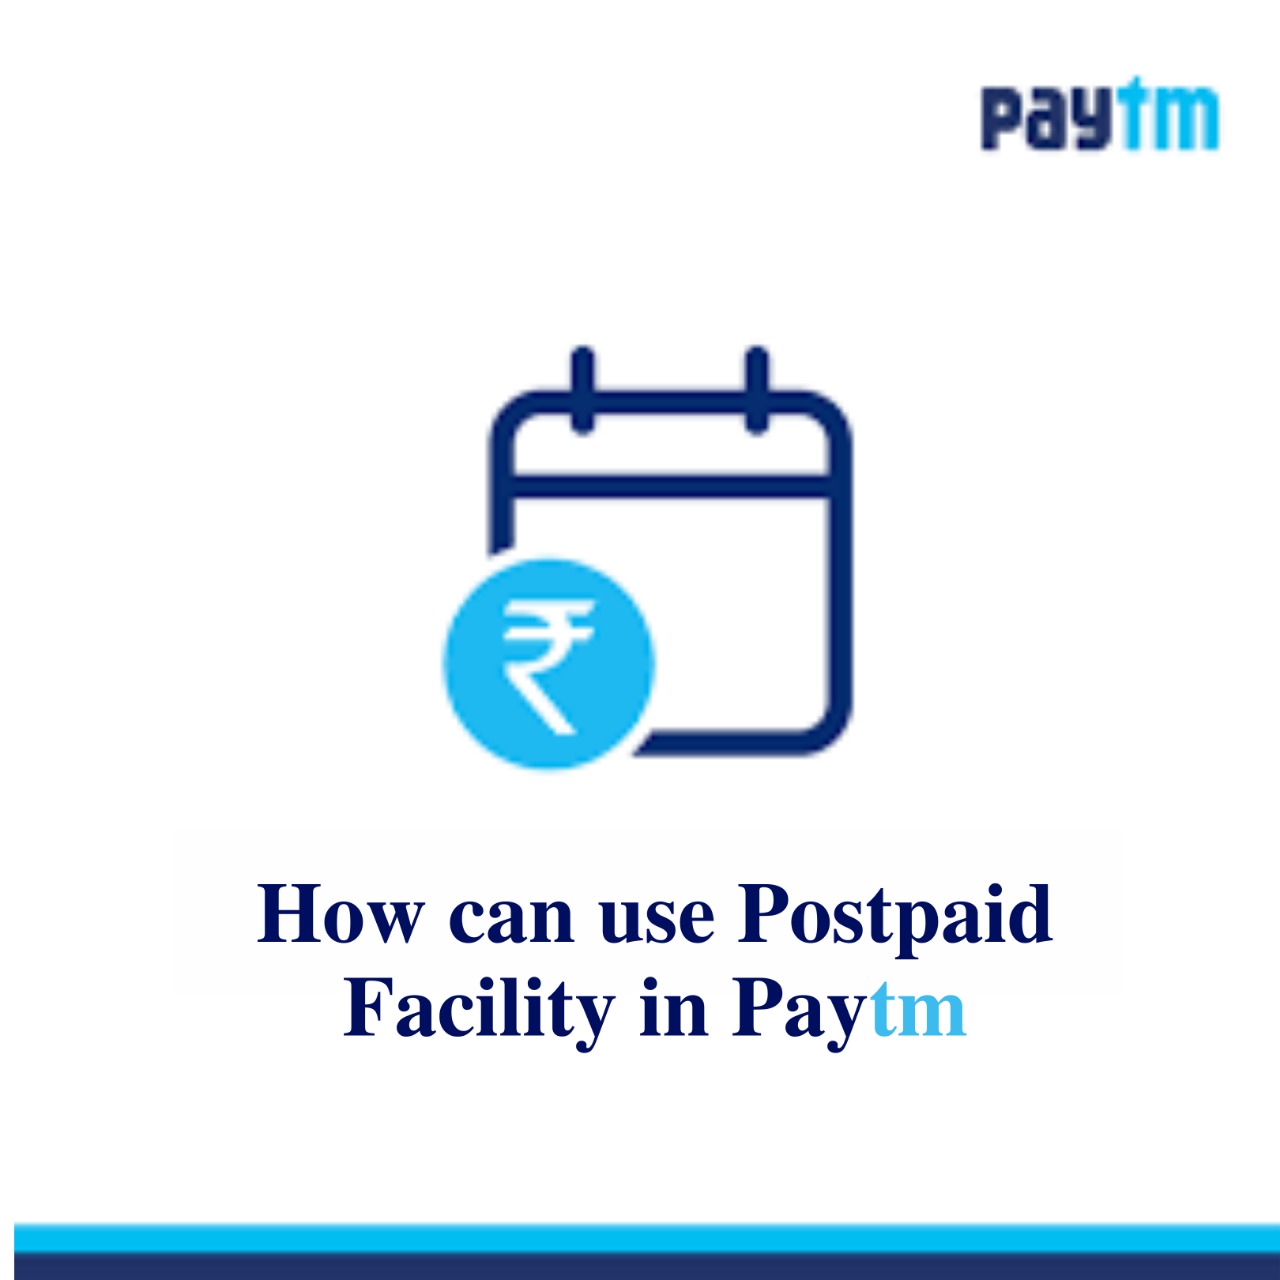 How can use Postpaid facility in Paytm